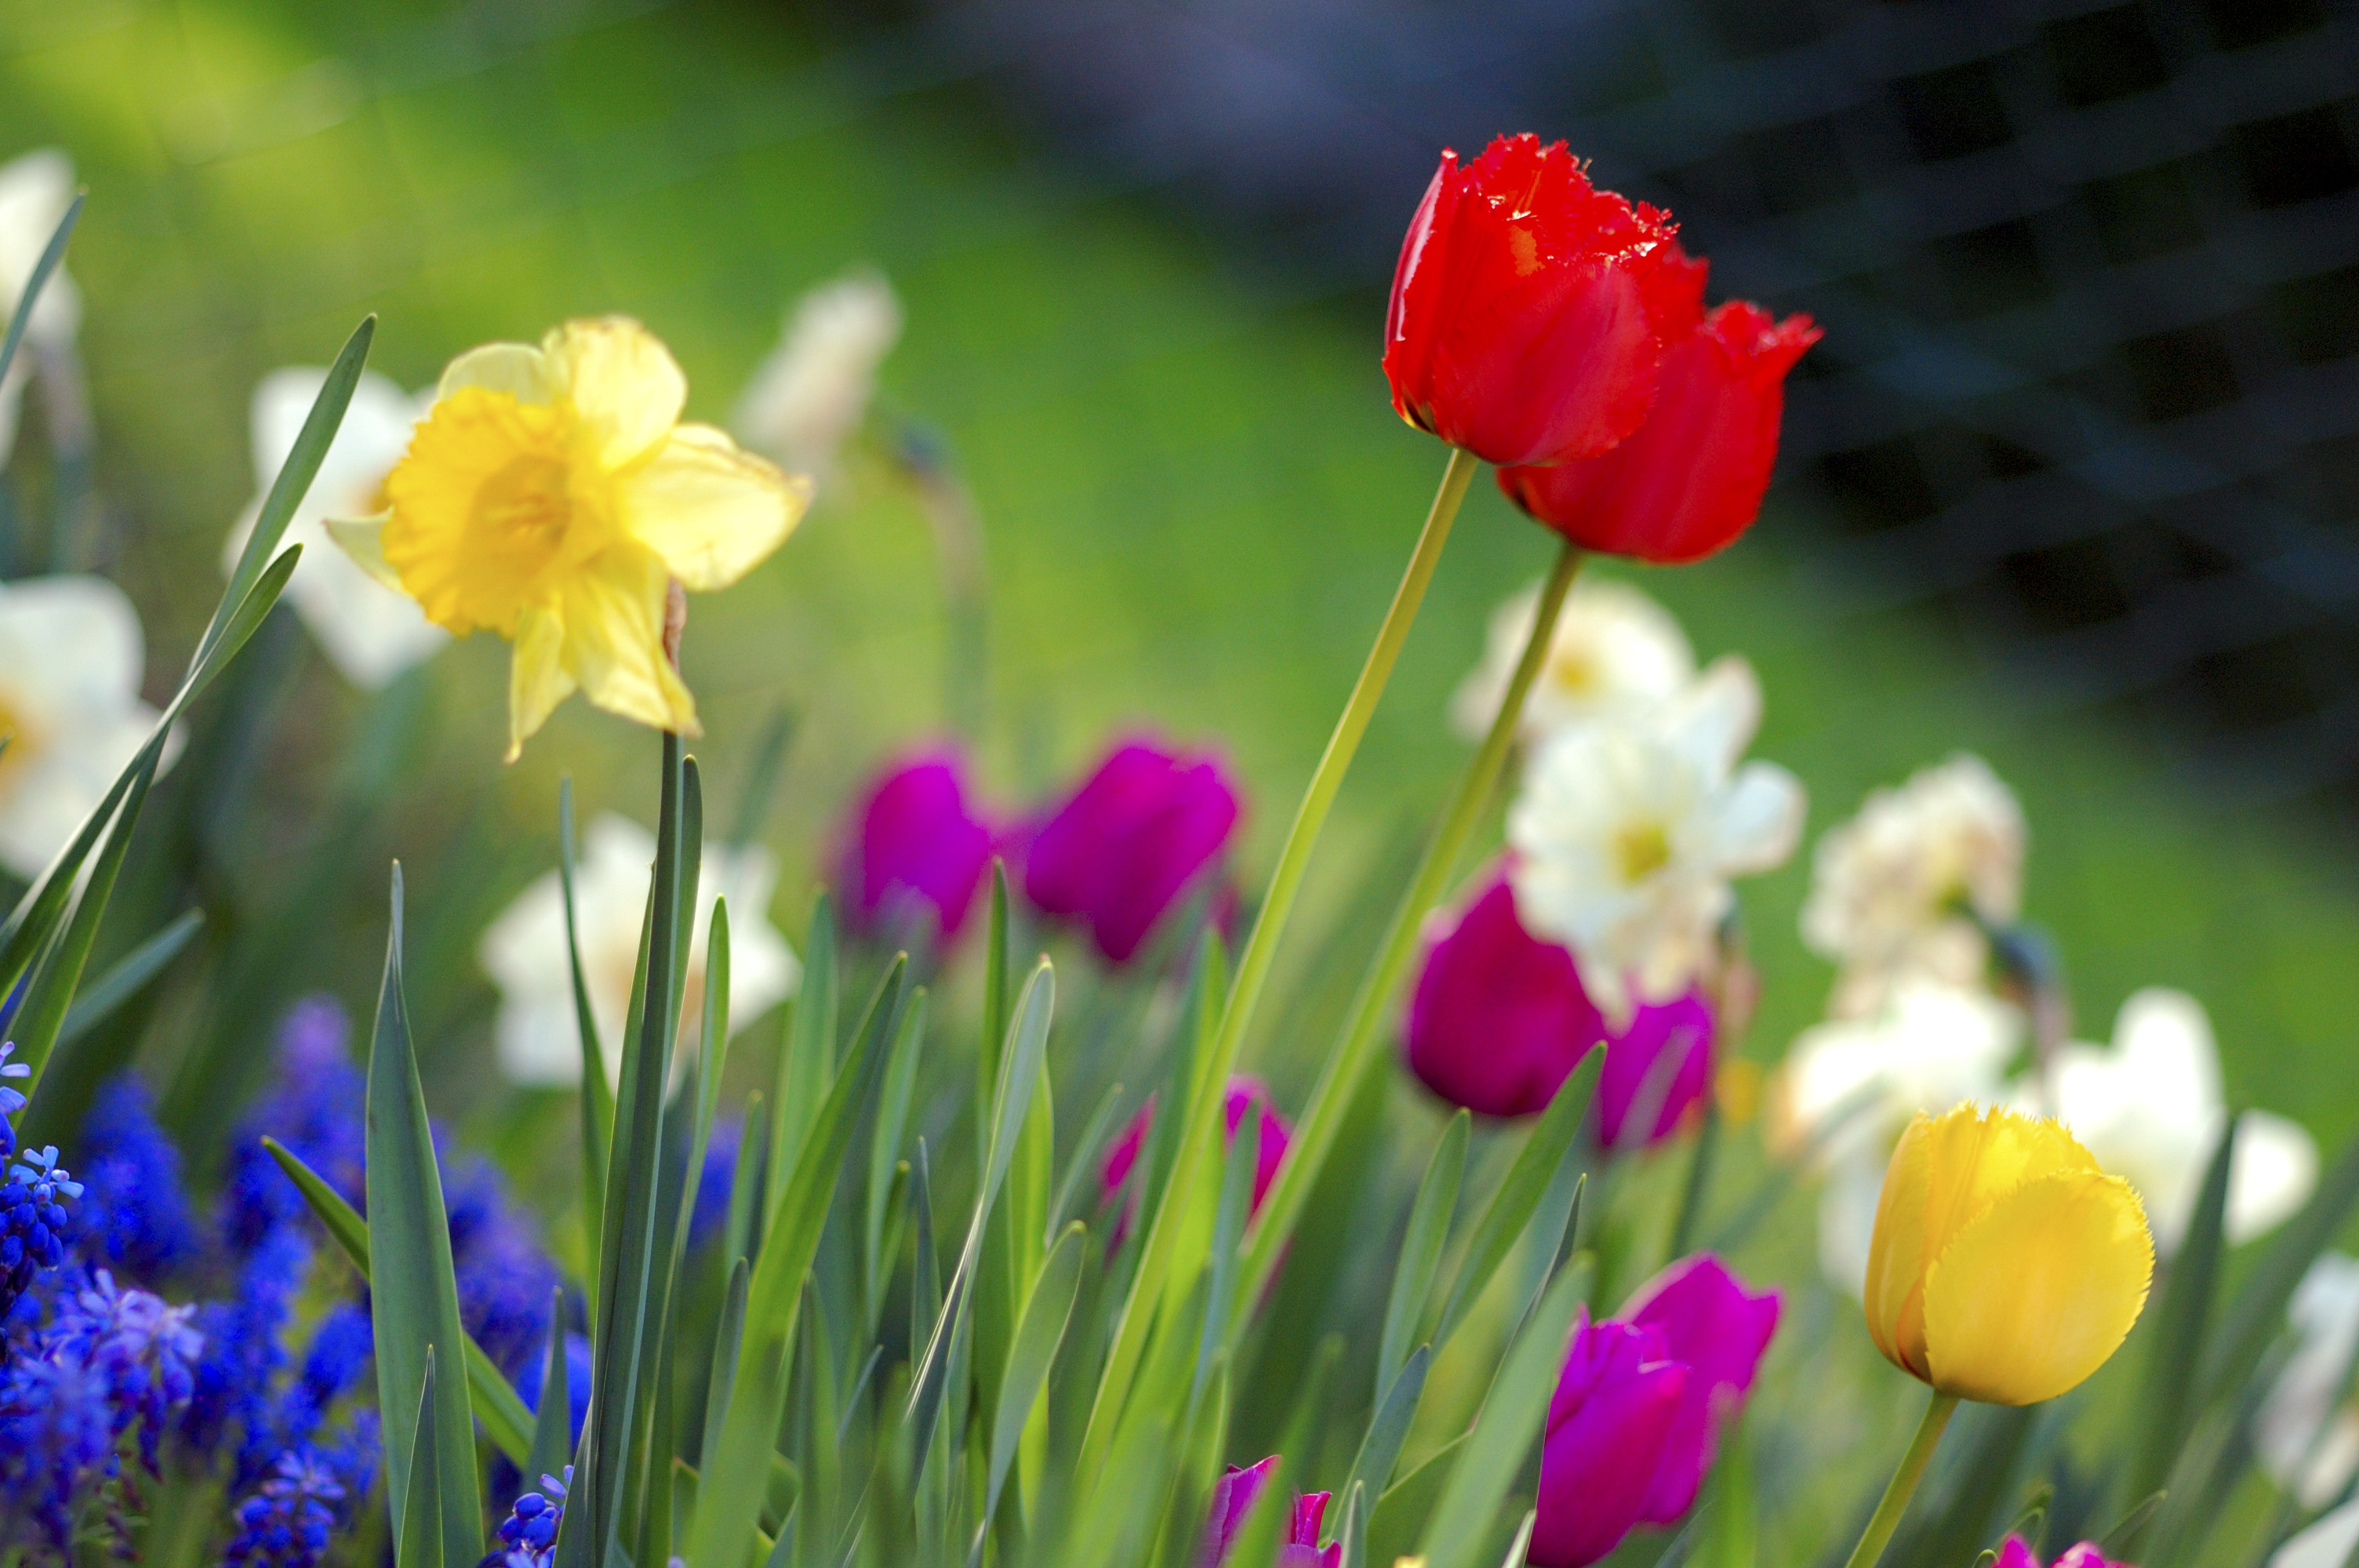 Spring On Mobile Means Springtime Season HD Wallpaper And Image